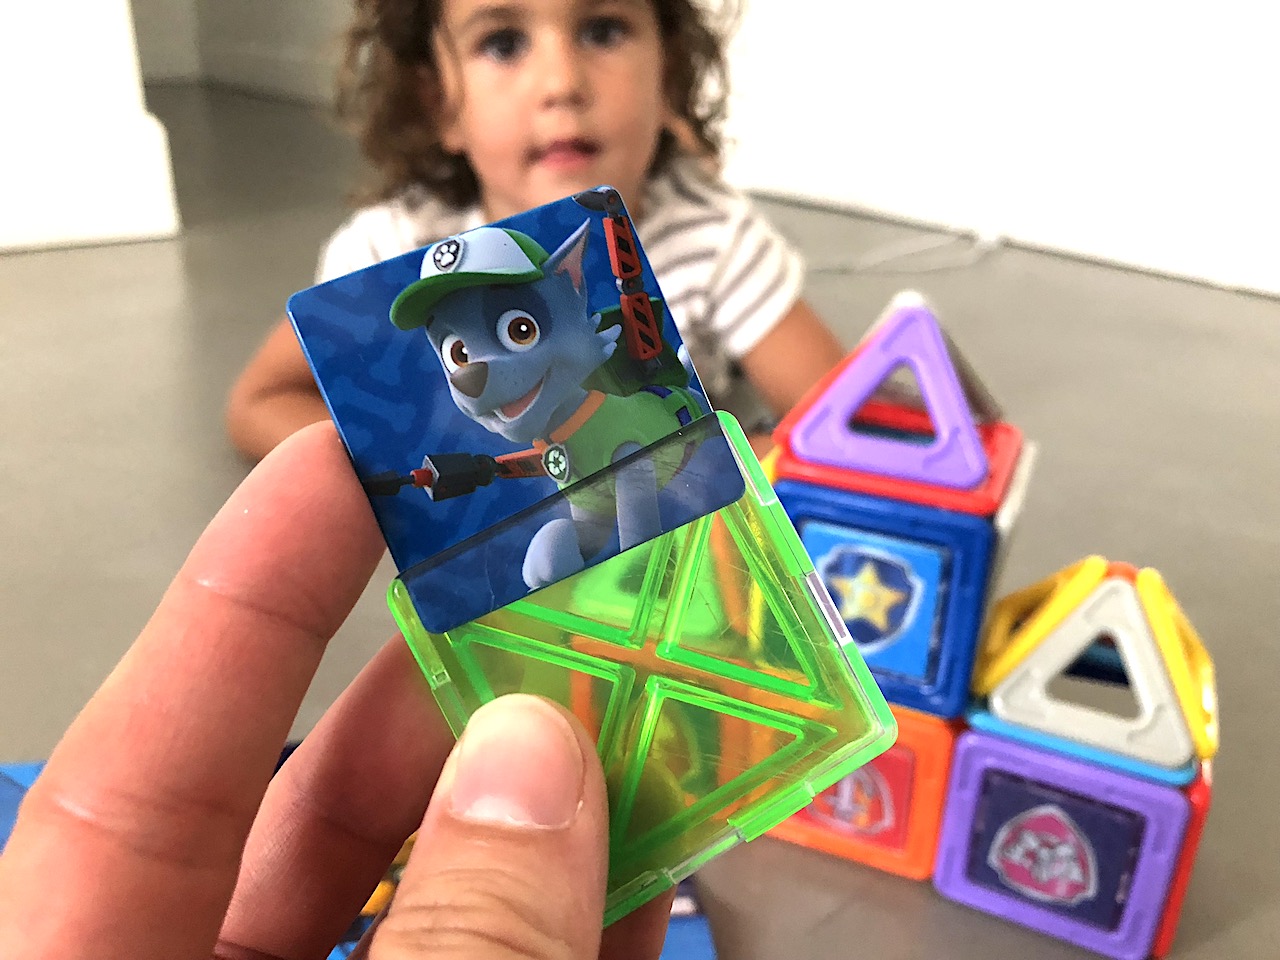 Paw Patrol Magformers - Best STEM toy for children of all ages #Magformers #STEM #STEMToys #BestToy #AwardWinning